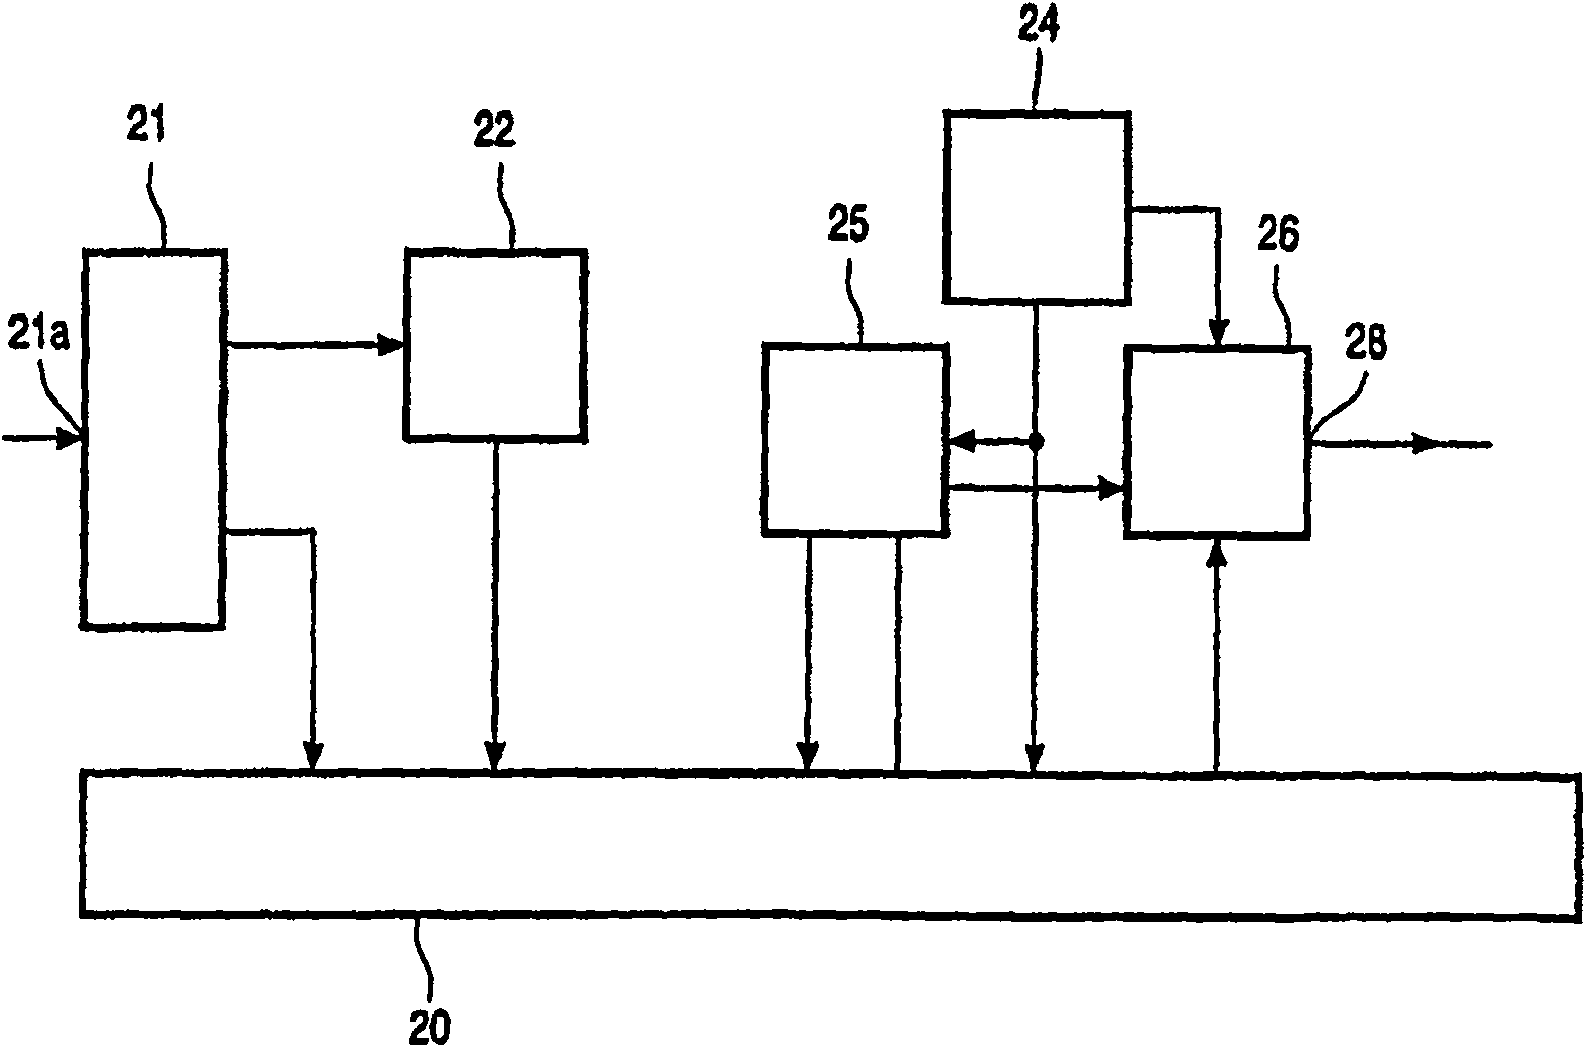 Conditional access apparatus and method